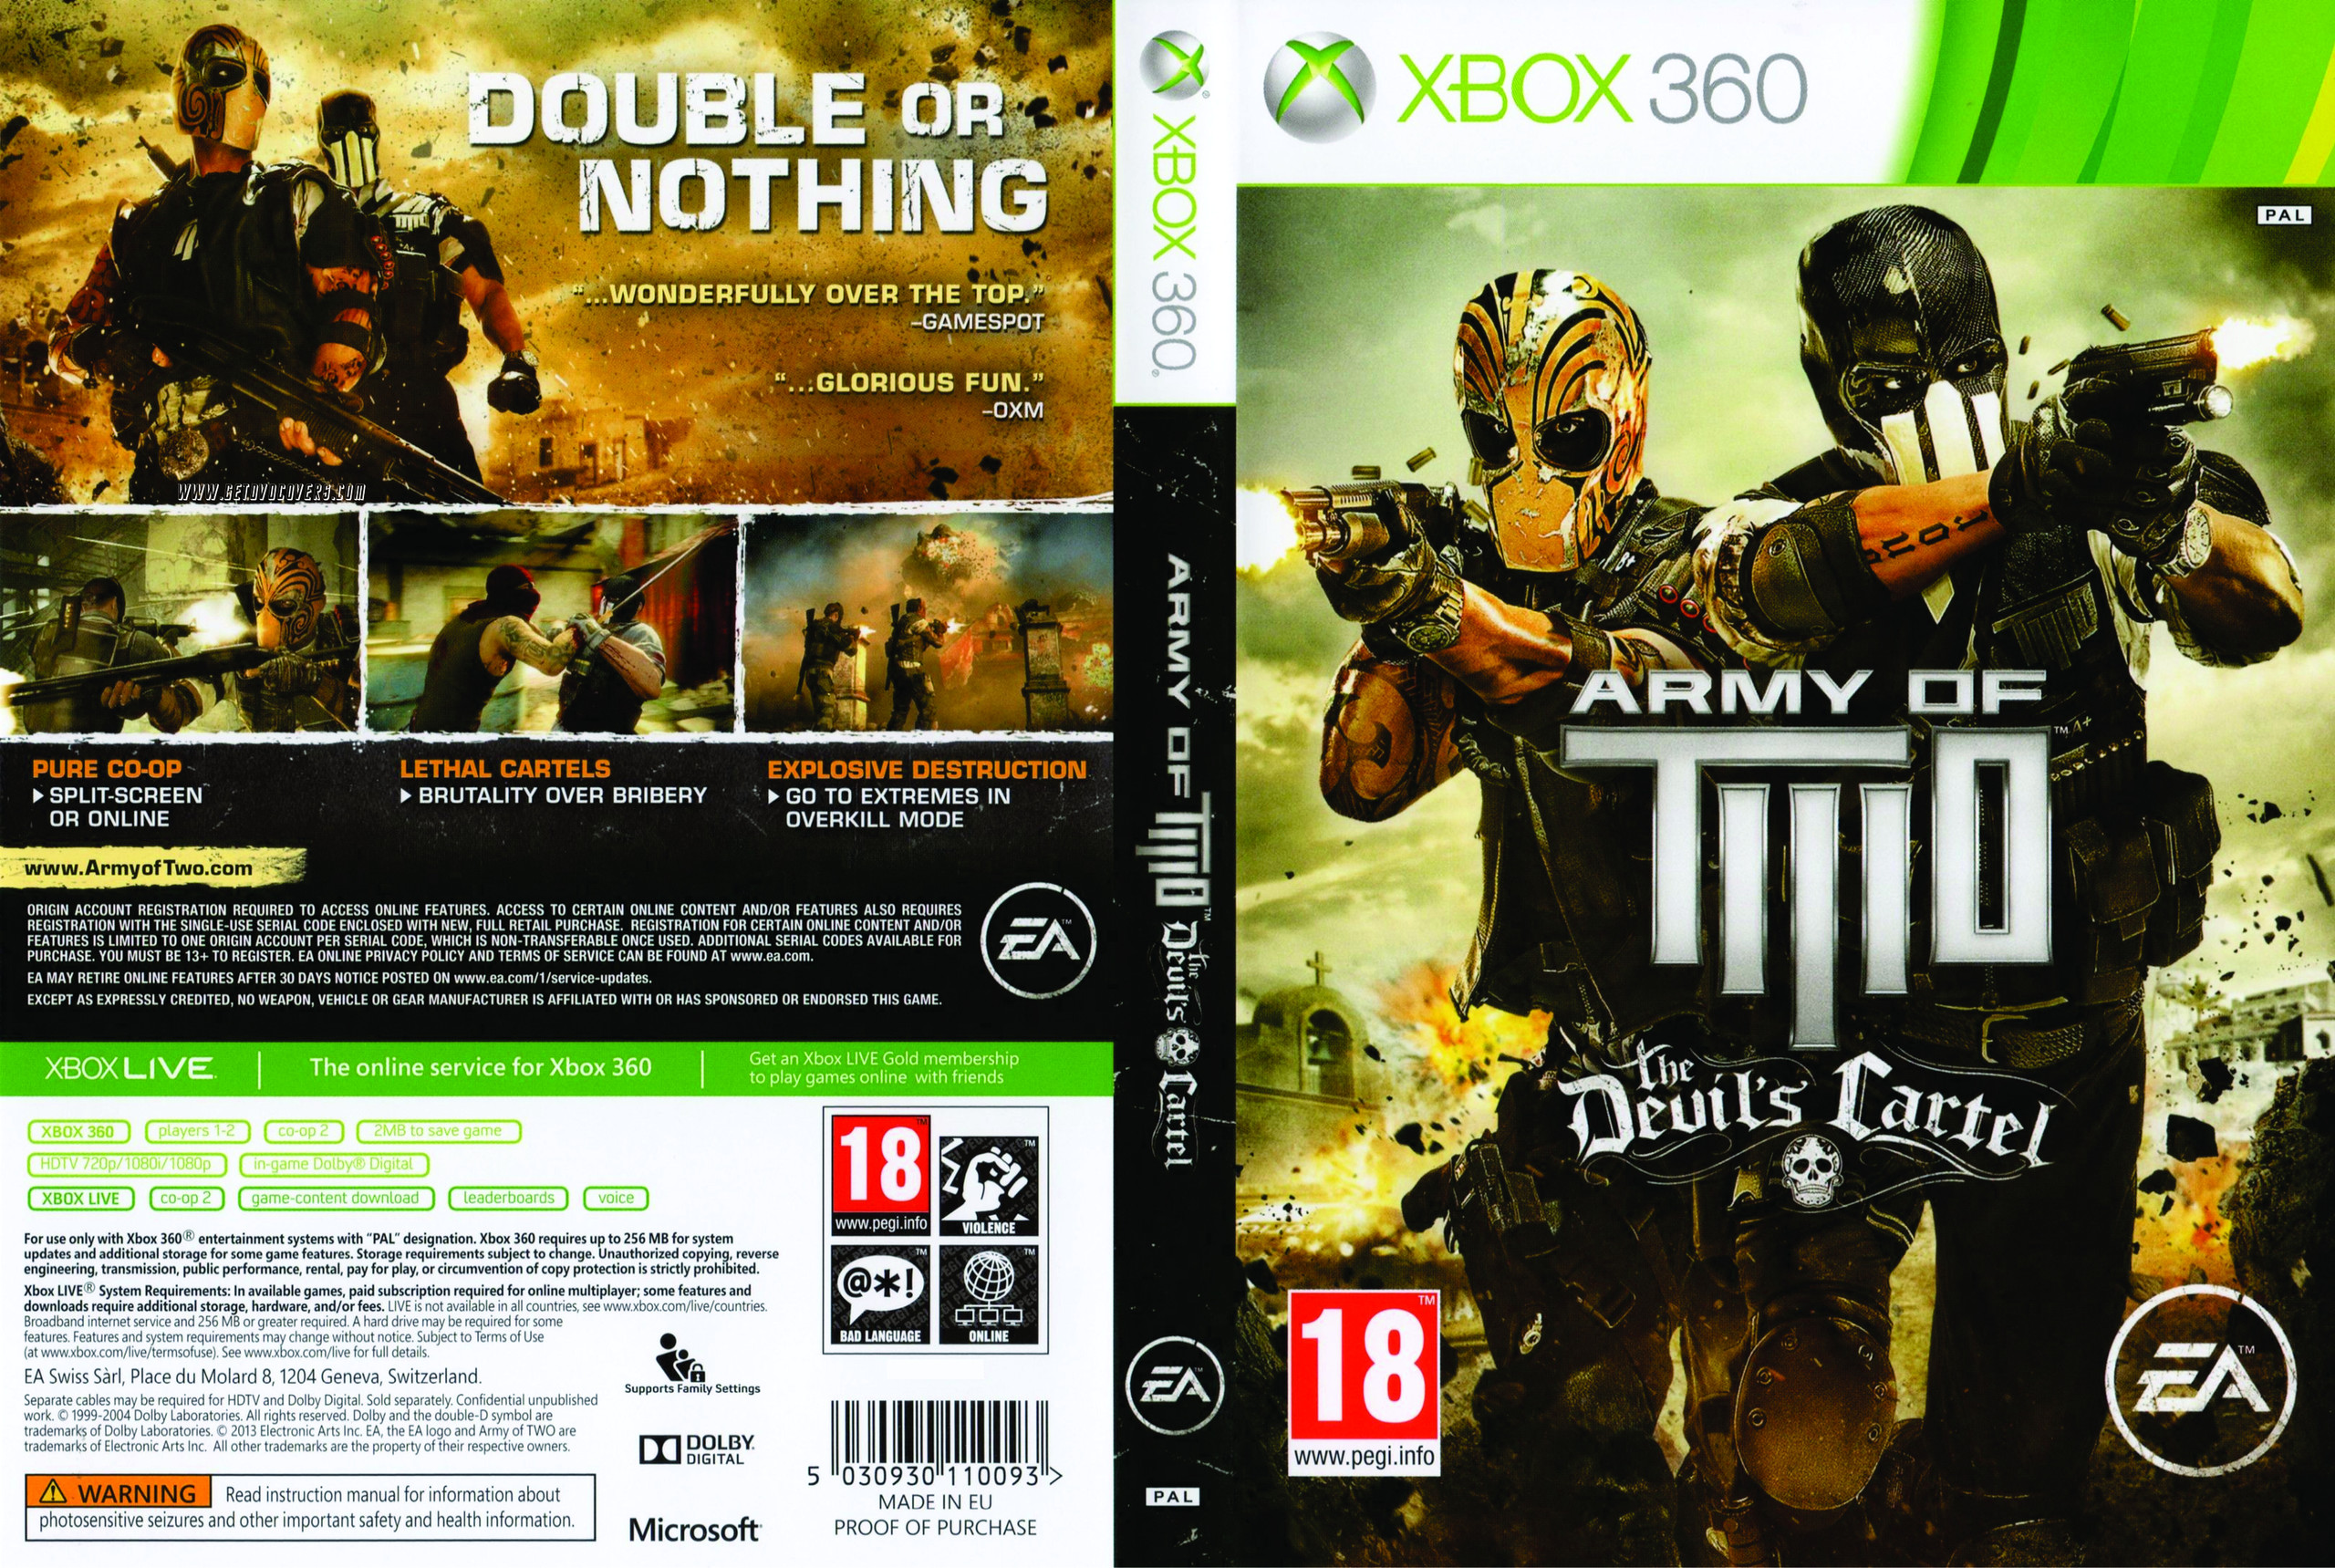 Xbox 360 games download. Army of two Xbox 360 обложка. Army of two на Икс бокс 360. Обложки к играм Xbox 360 Army of two. Army of two the Devil's Cartel Xbox 360.